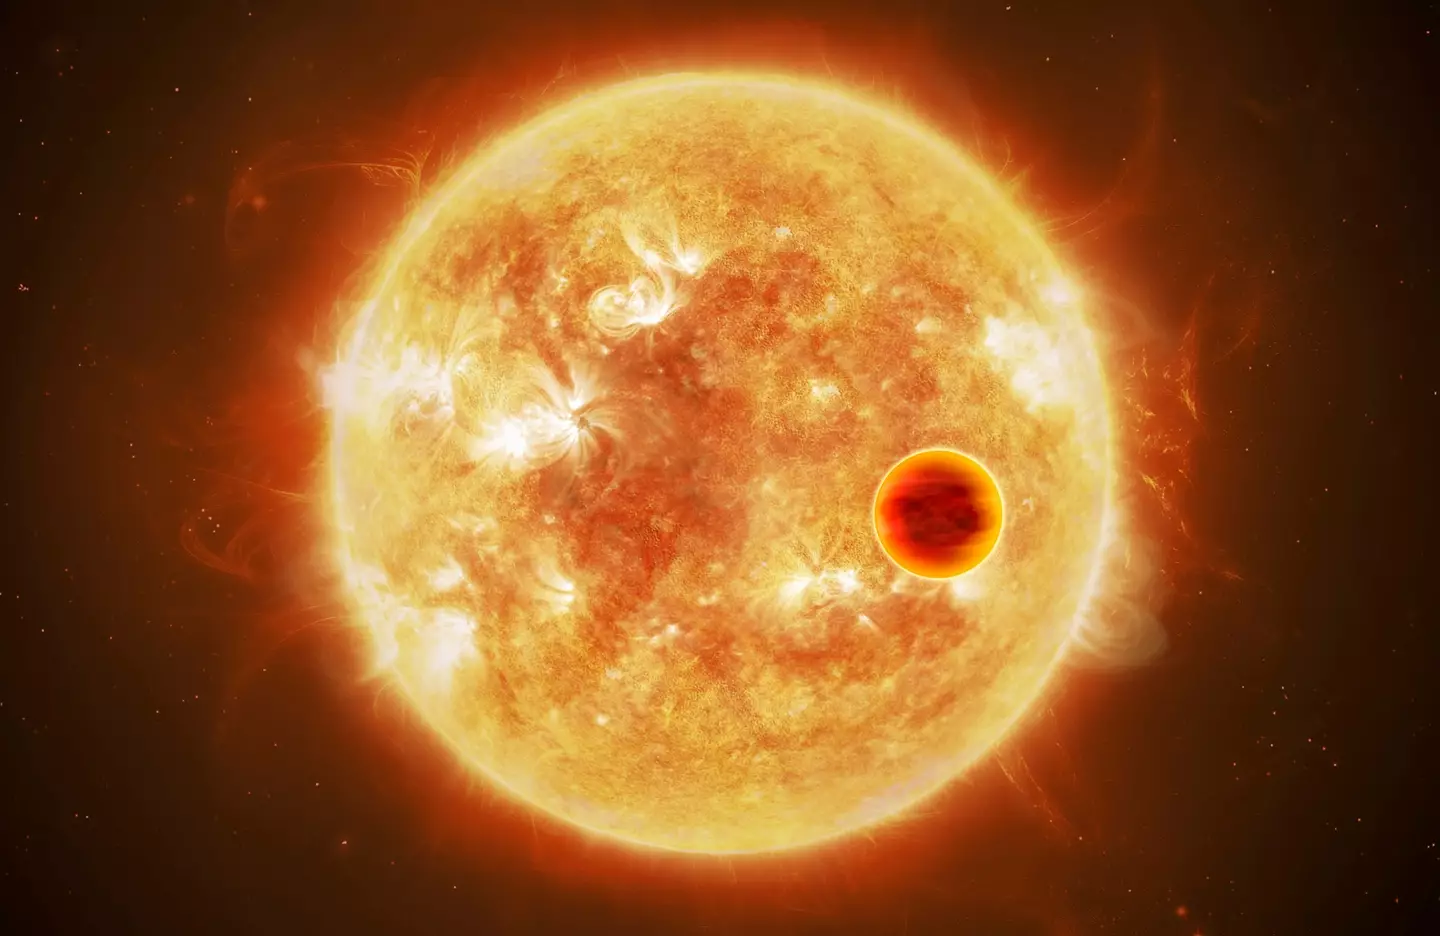 The Sun will gobble up its closest planets. (ESA/ATG medialab)